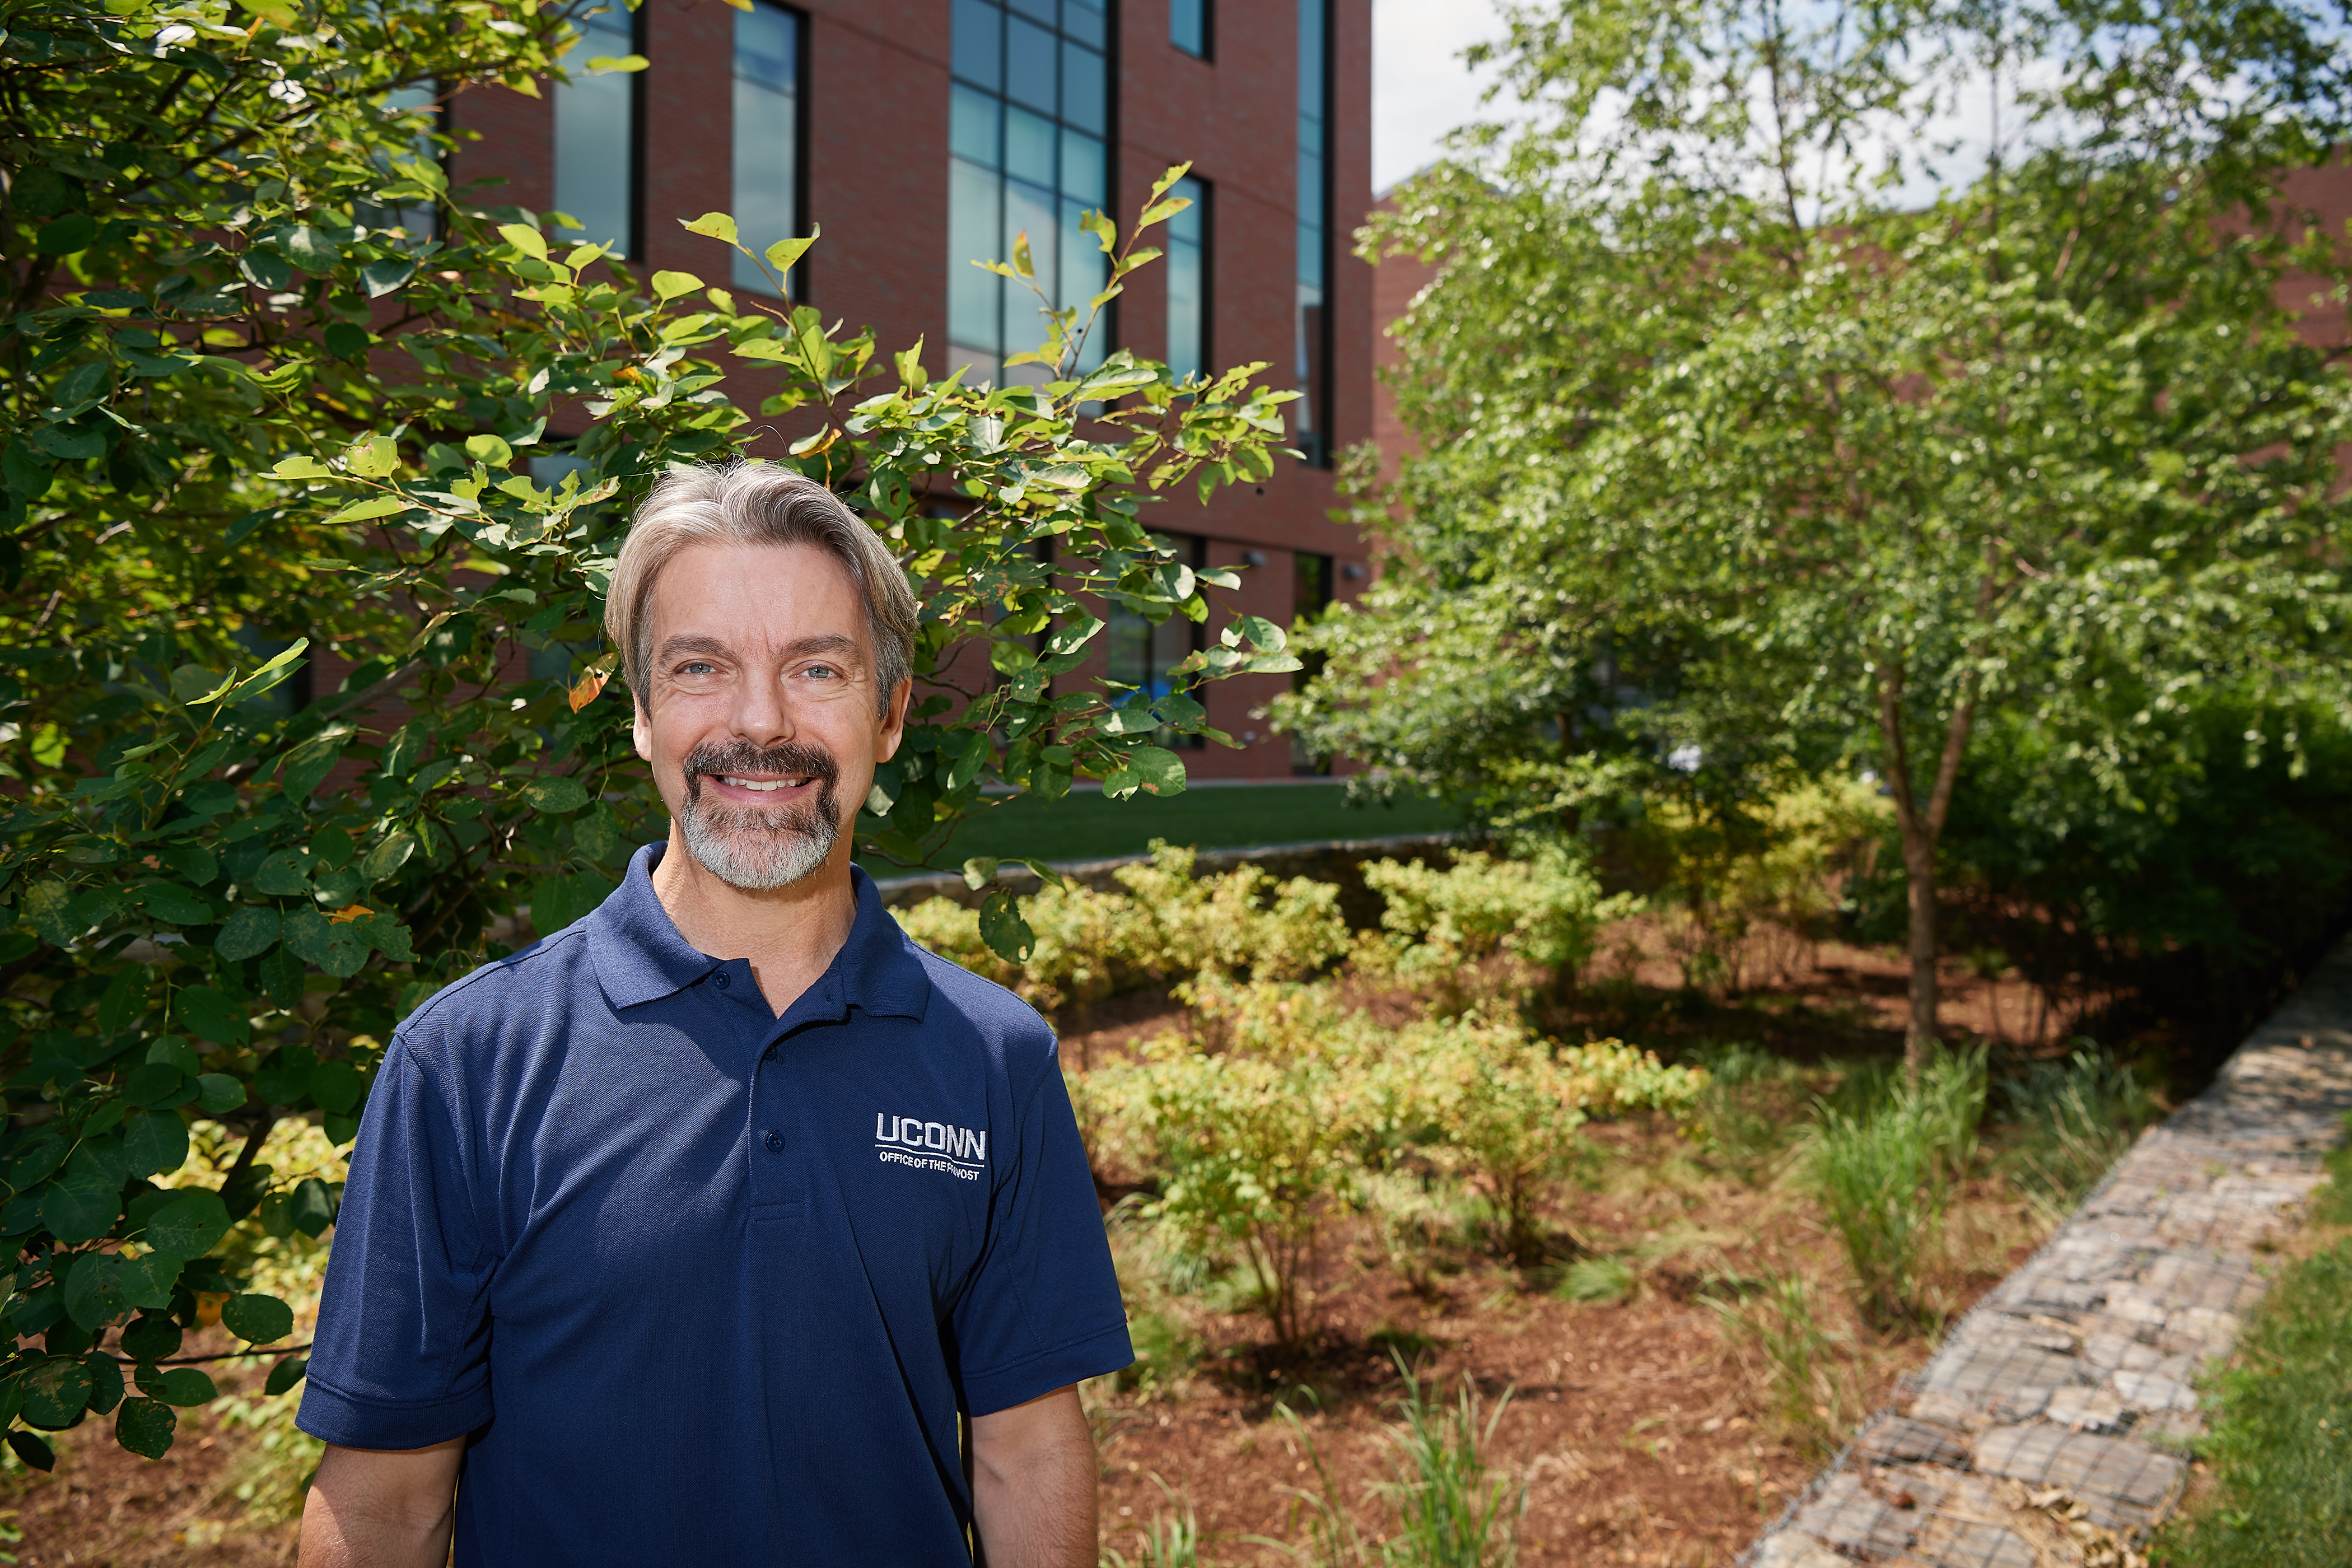 John Volin, vice provost for academic affairs and professor of natural resources and the environment, stands near a bioretention swale outside behind McHugh Hall on July 11, 2018. (Peter Morenus/UConn Photo)